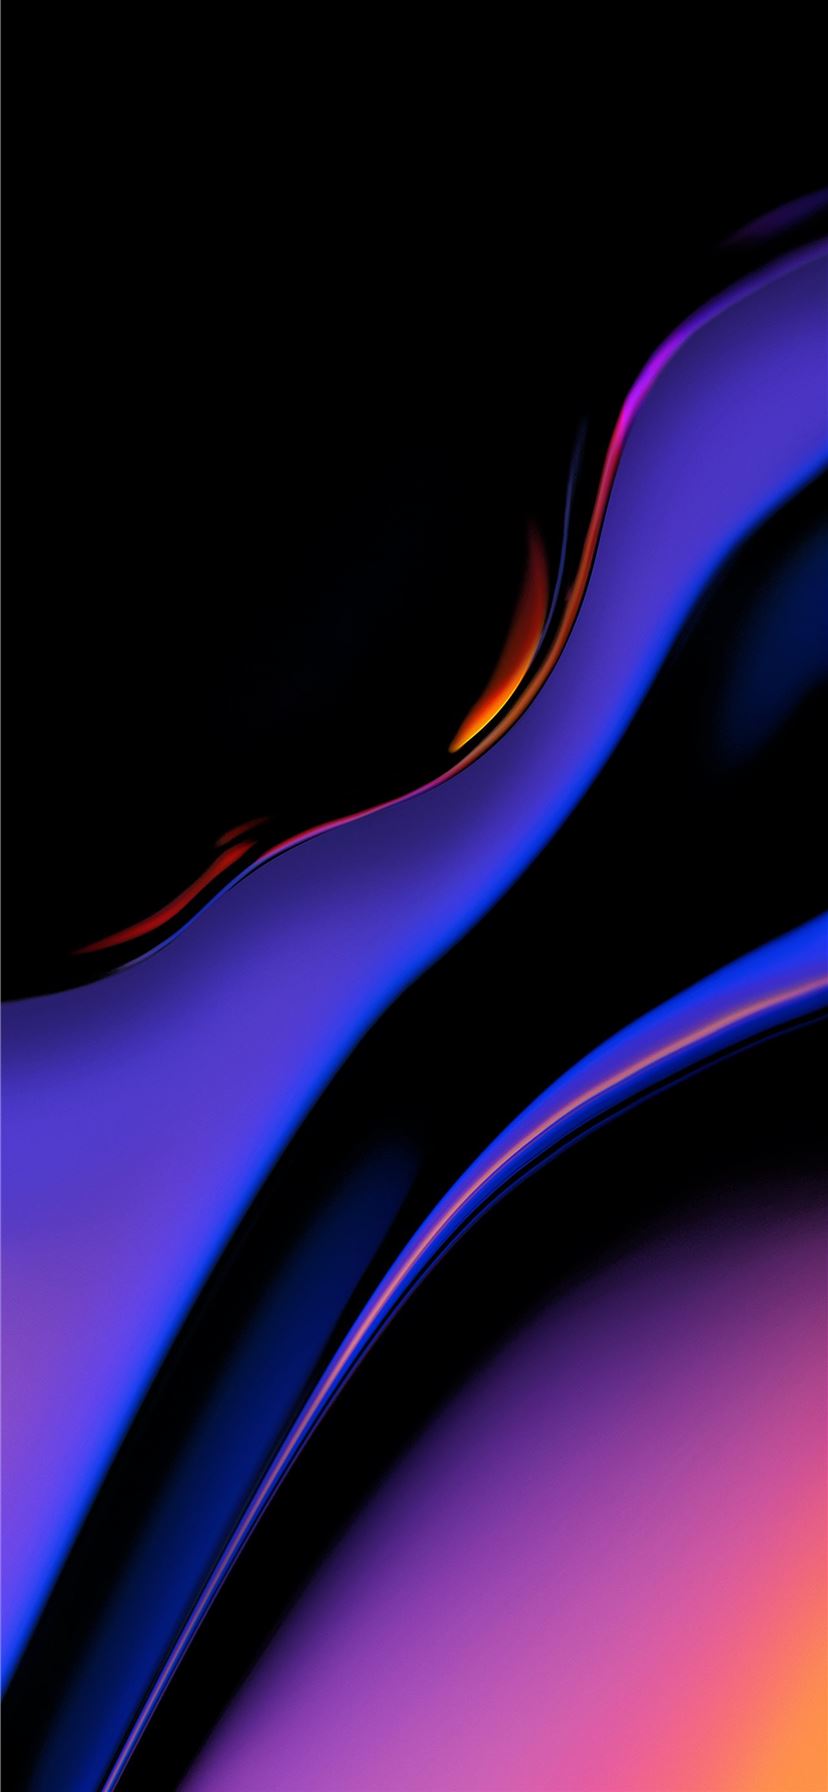 Download the Latest OnePlus 6T Wallpapers Direct Link